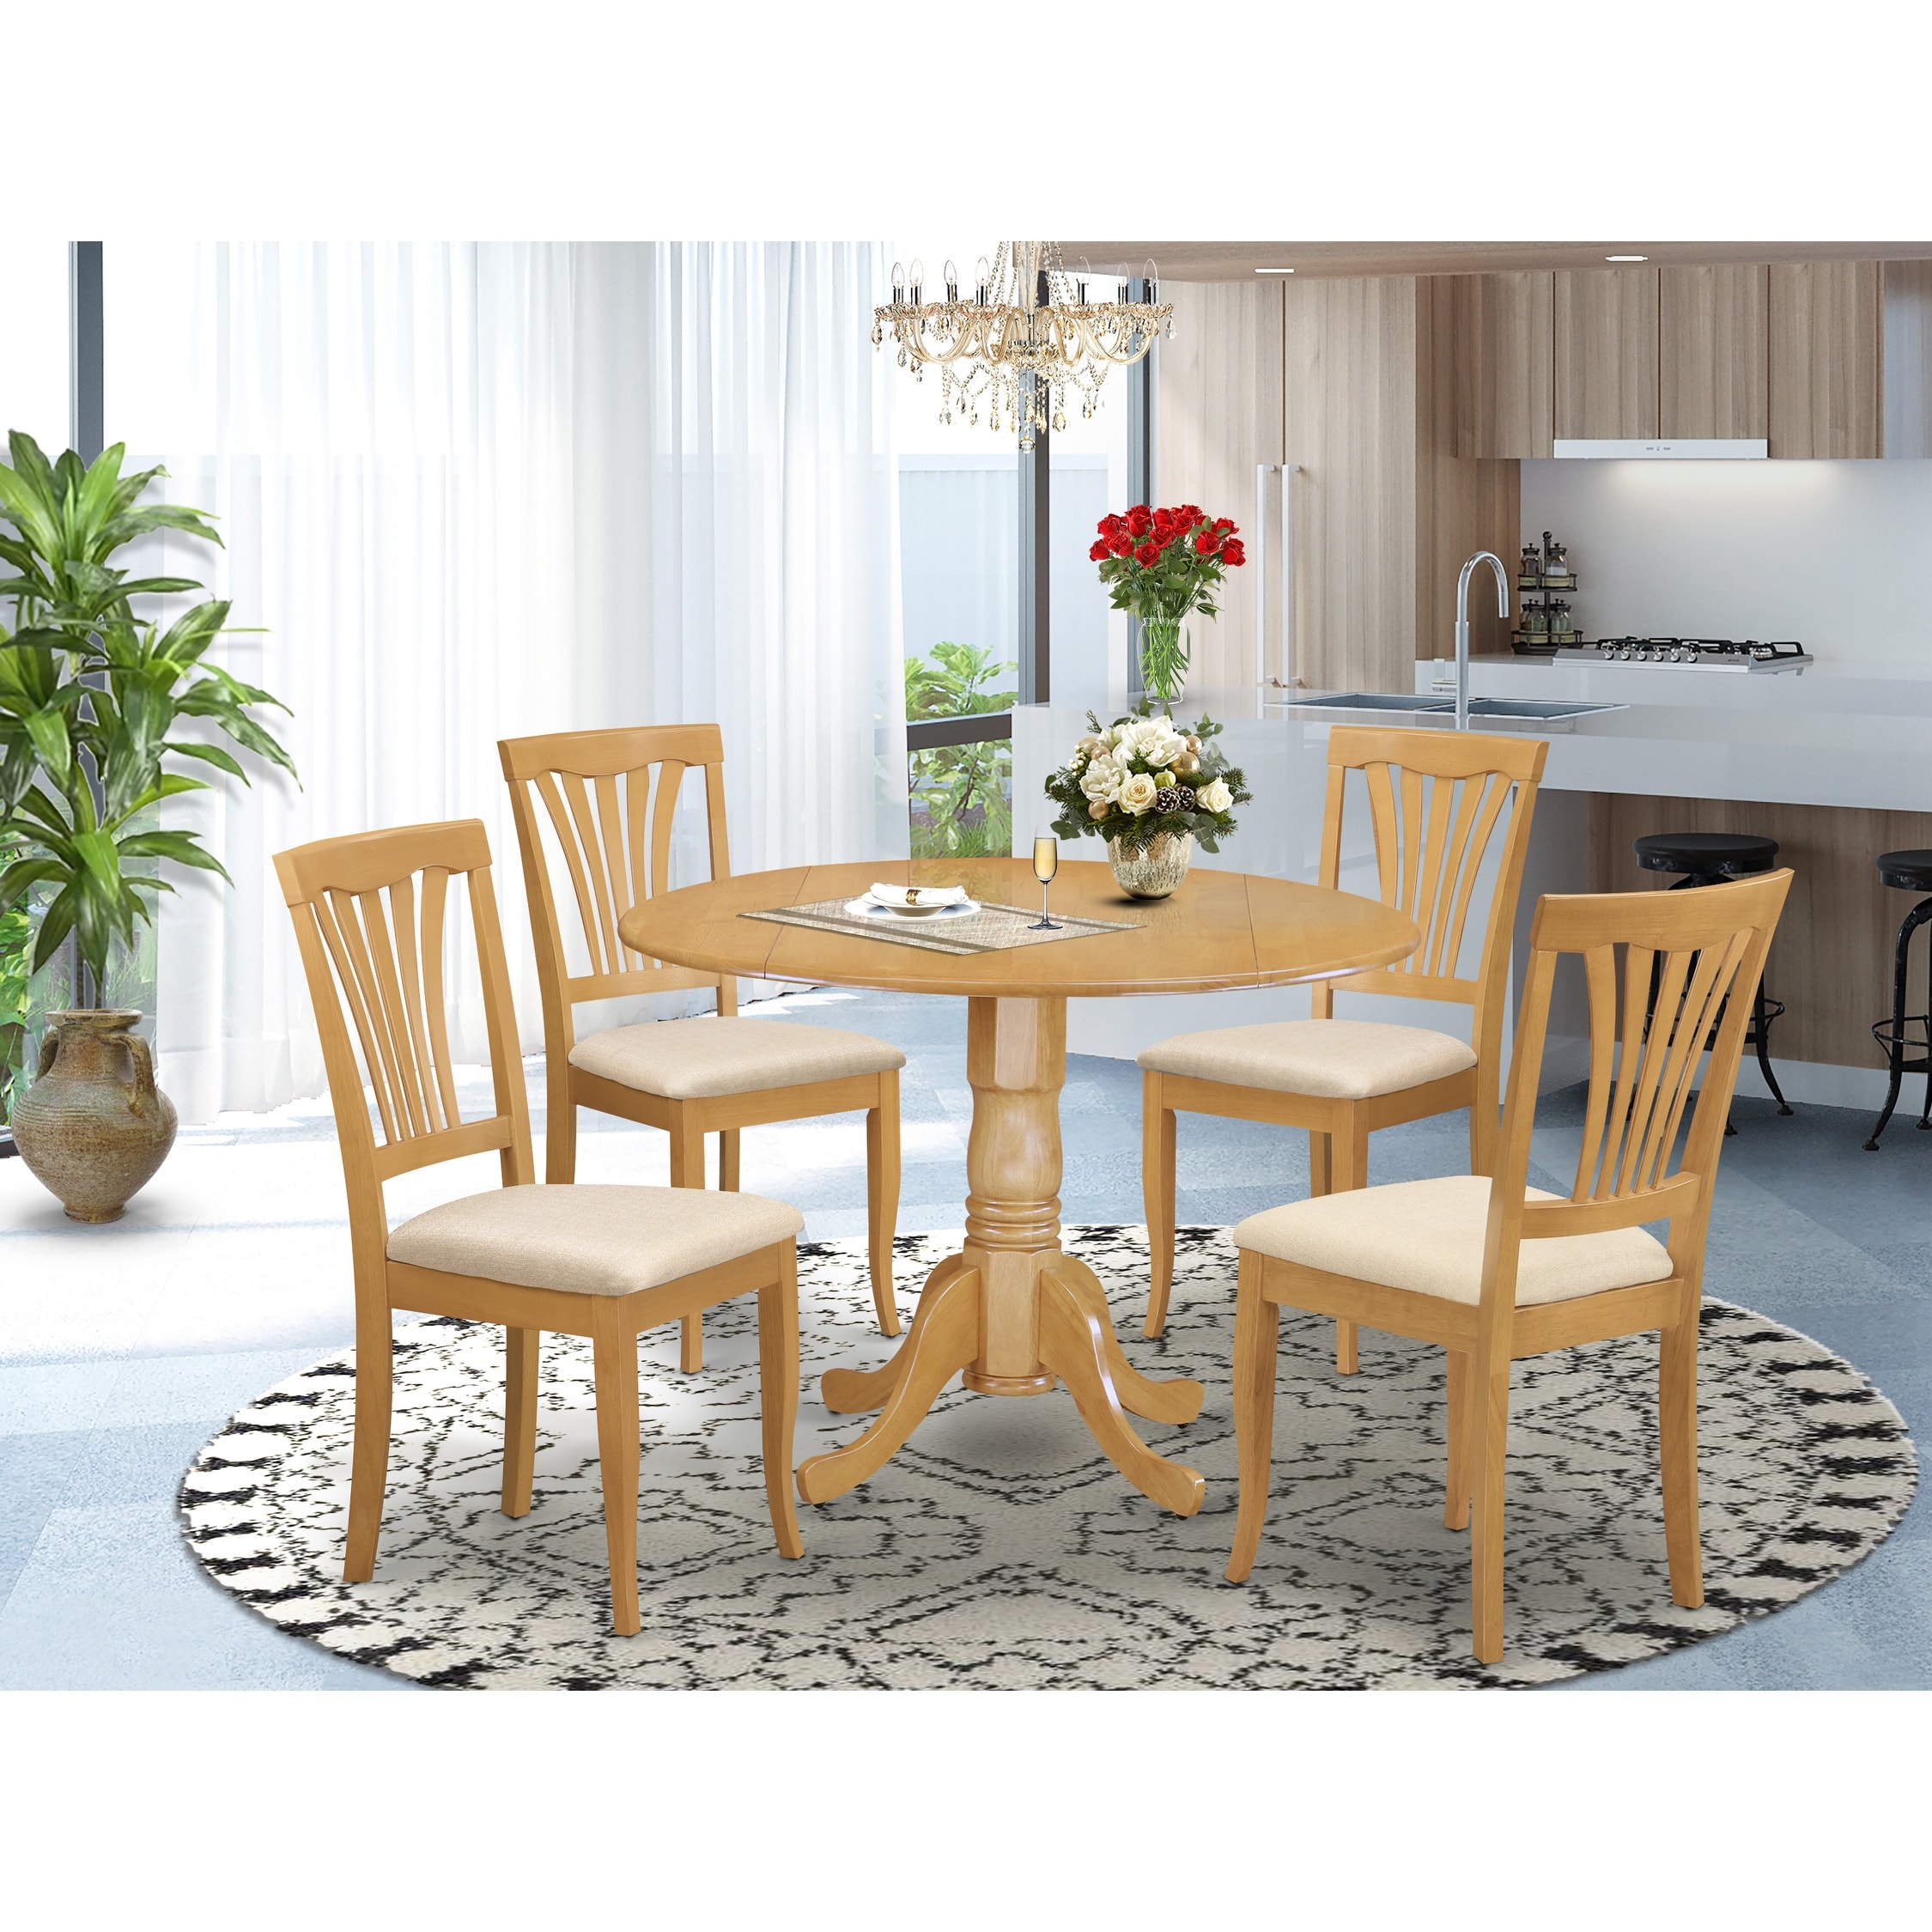 Mercers Furniture Corona 5 Dining Table with 4 Chairs Dining Set 150cm 